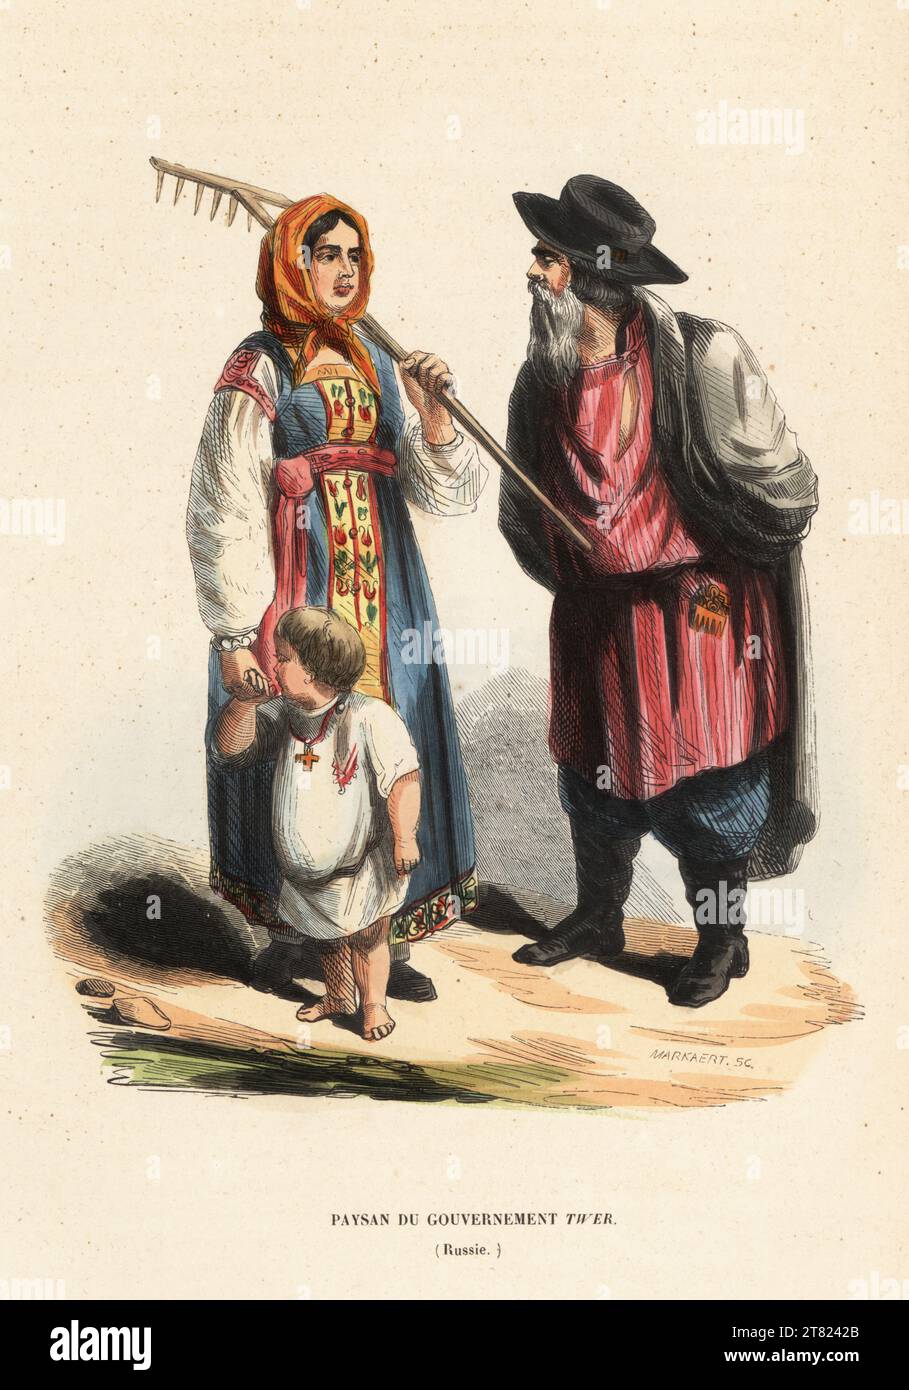 Peasants of the city of Tver, Russia, 19th century. Woman with rake in embroidered gown and blouse, man in smock, breeches and boots. Paysan du gouvernement Twer (Russie). Handcoloured woodcut by L. Markaert from Auguste Wahlen's Moeurs, Usages et Costumes de tous les Peuples du Monde, (Manners, Customs and Costumes of all the People of the World) Librairie Historique-Artistique, Brussels, 1845. Stock Photo